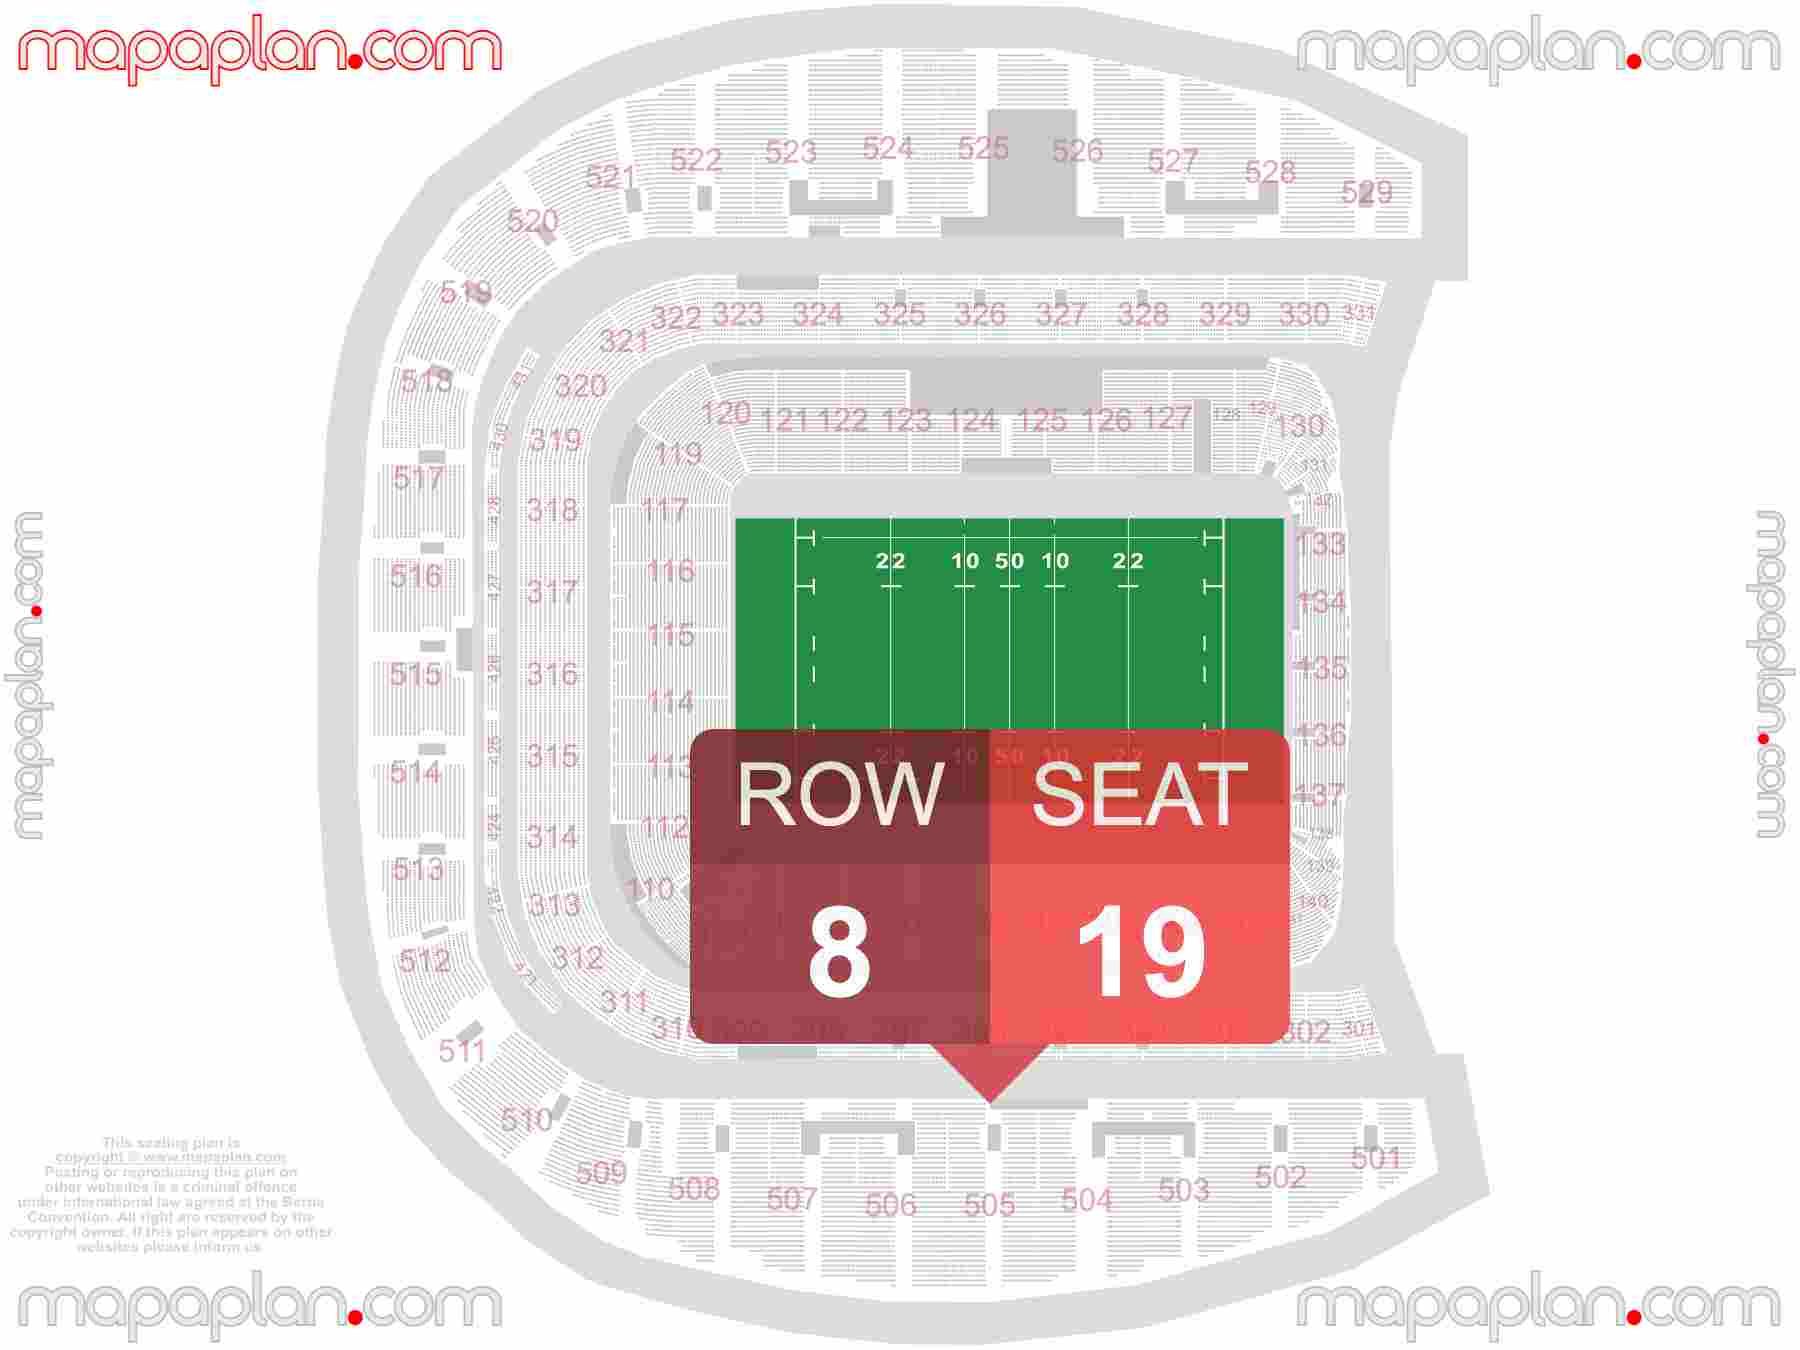 Dublin Aviva Stadium seating plan Rugby and NFL American football inside capacity view arrangement map - Interactive virtual 3d best seats & rows detailed stadium image configuration layout